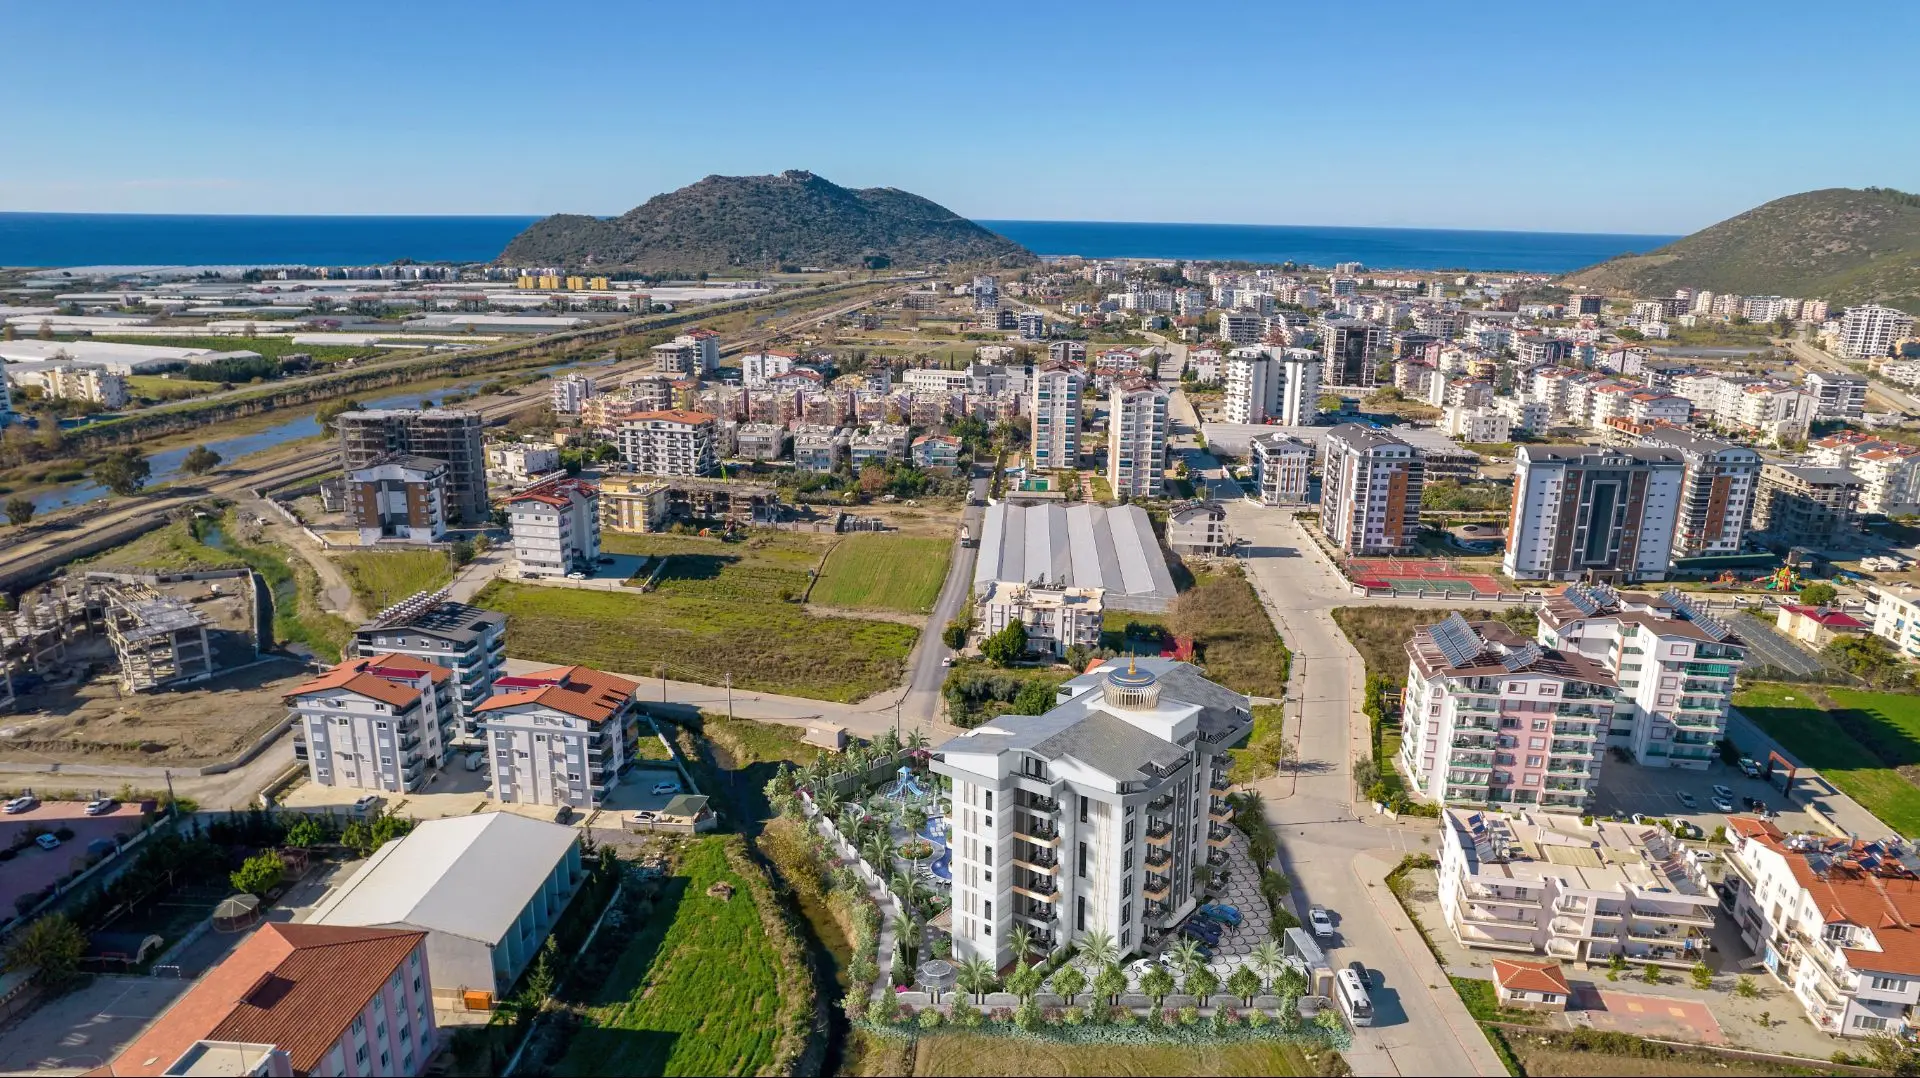 NEW HOUSING PROJECT IN GAZIPASA - FULL ACTIVITY